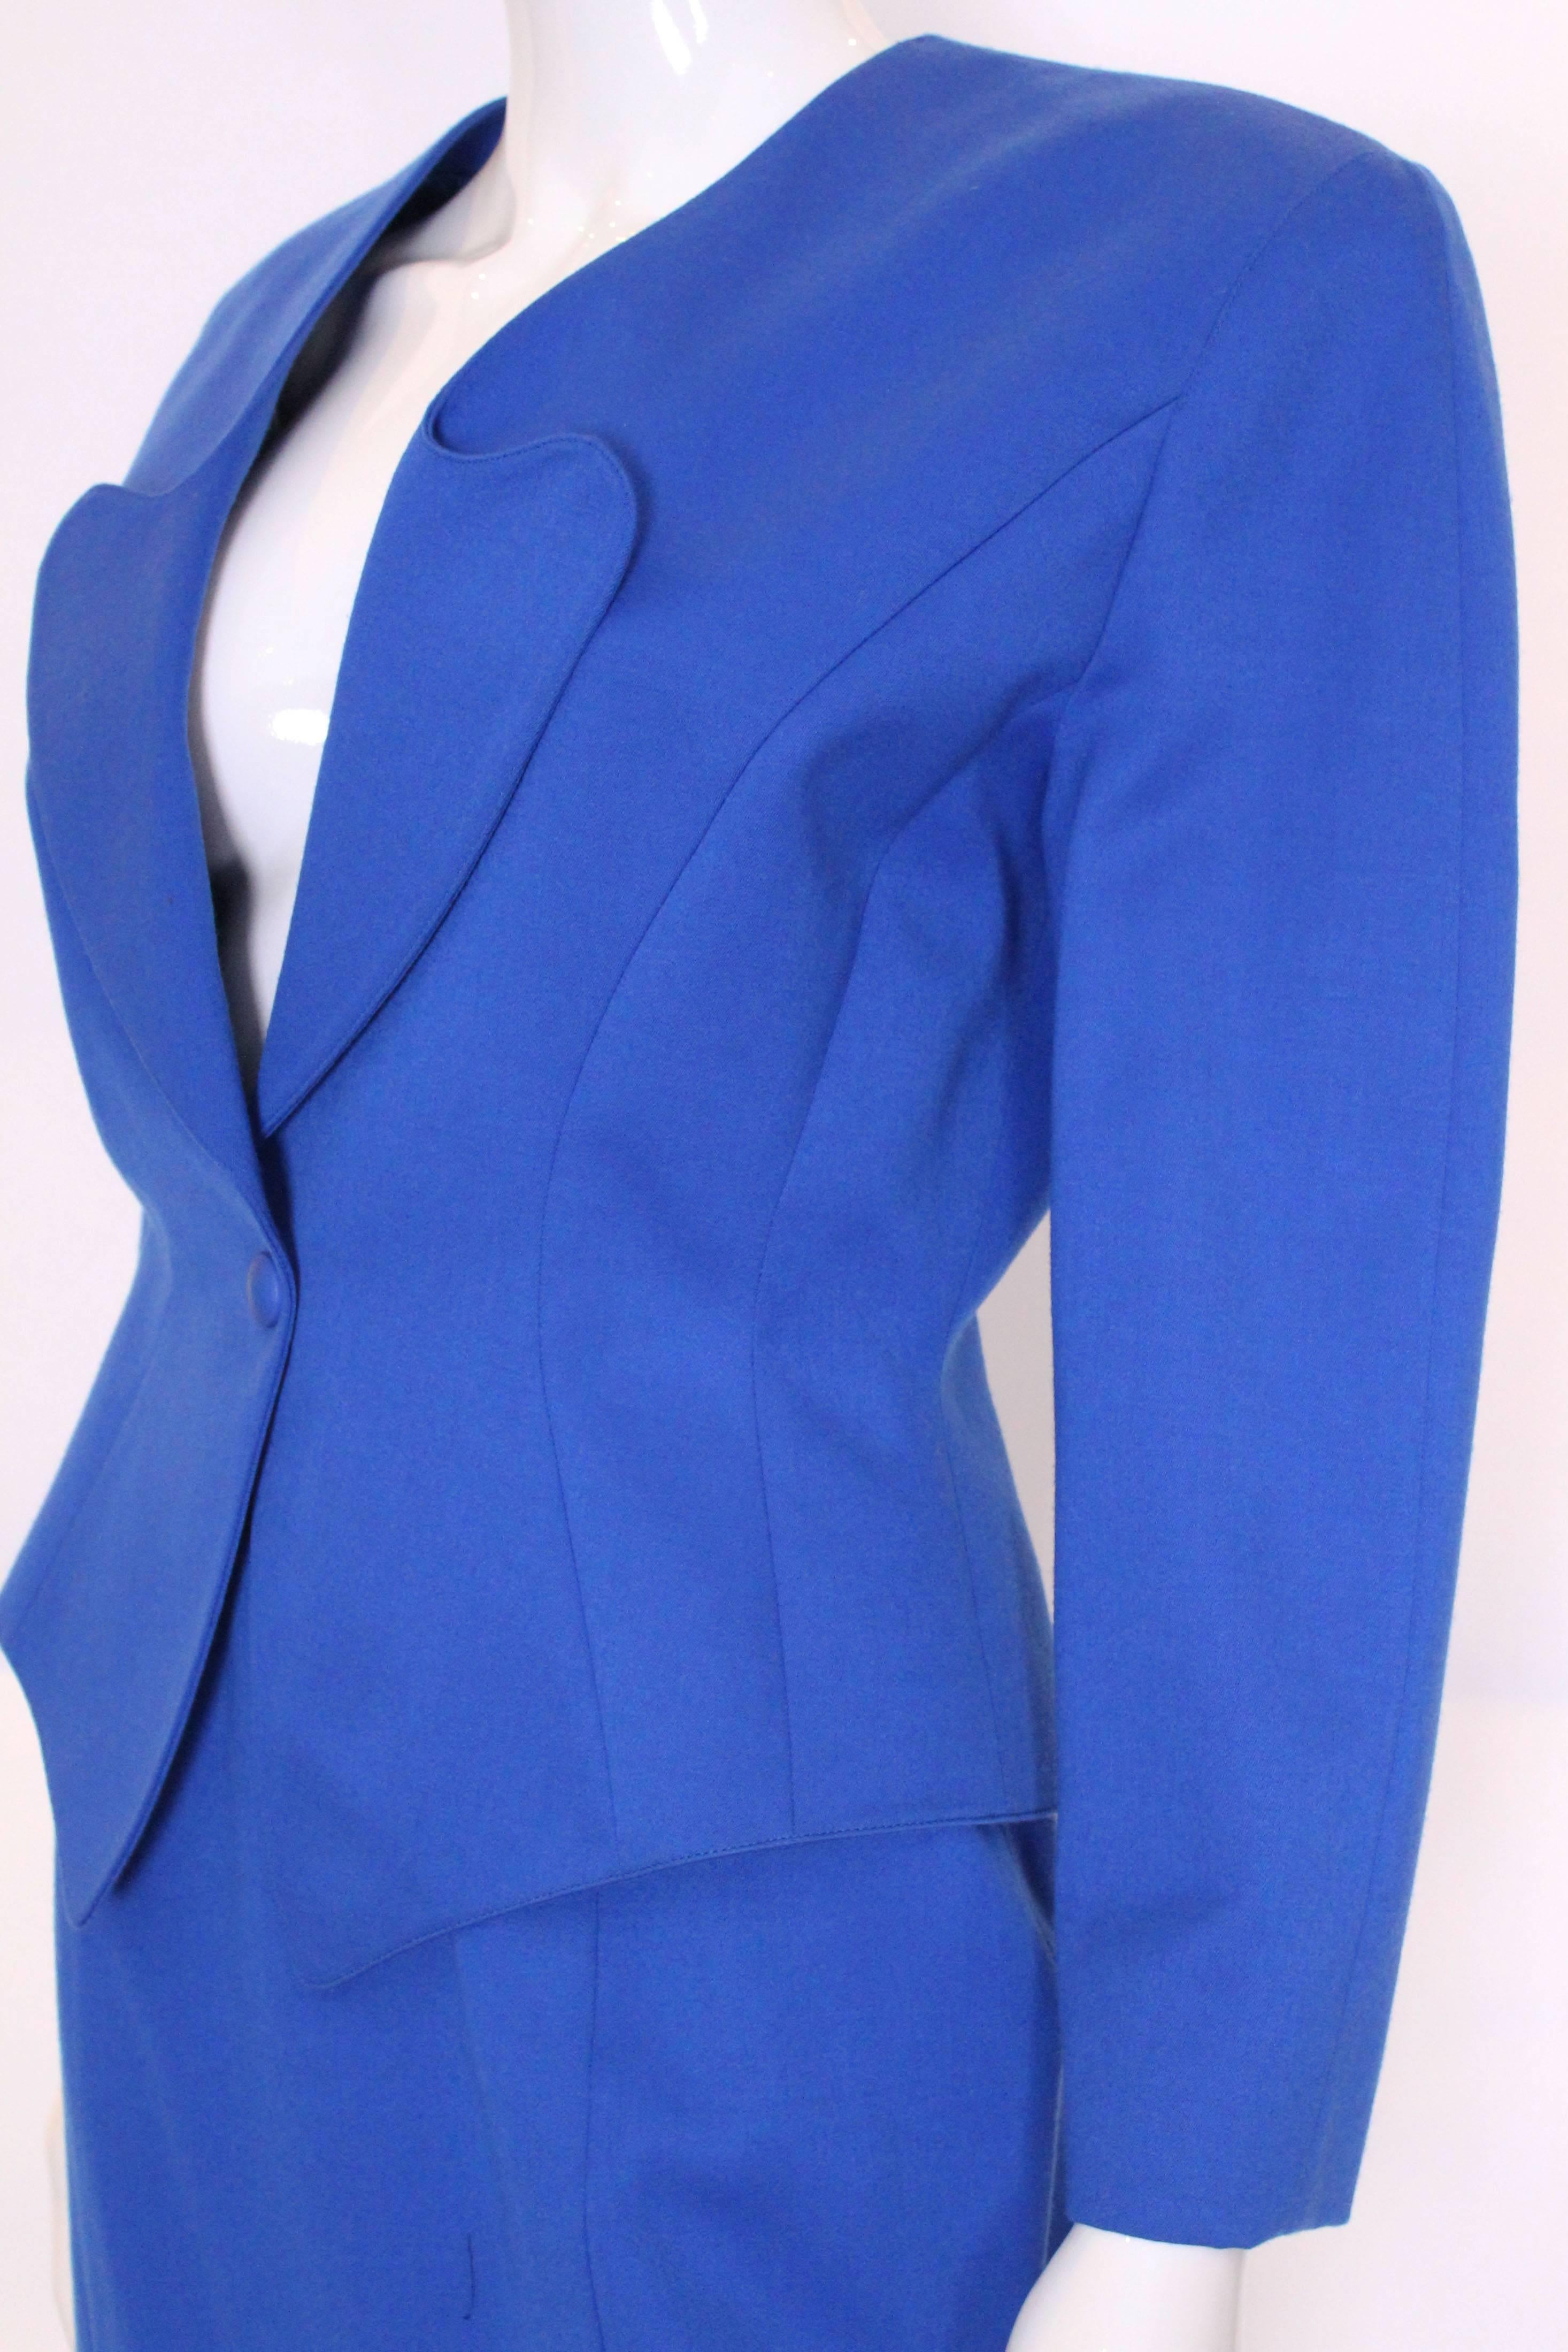 Women's Vintage 1980s Electric Blue Suit jacket and skirt by Thierry Mugler